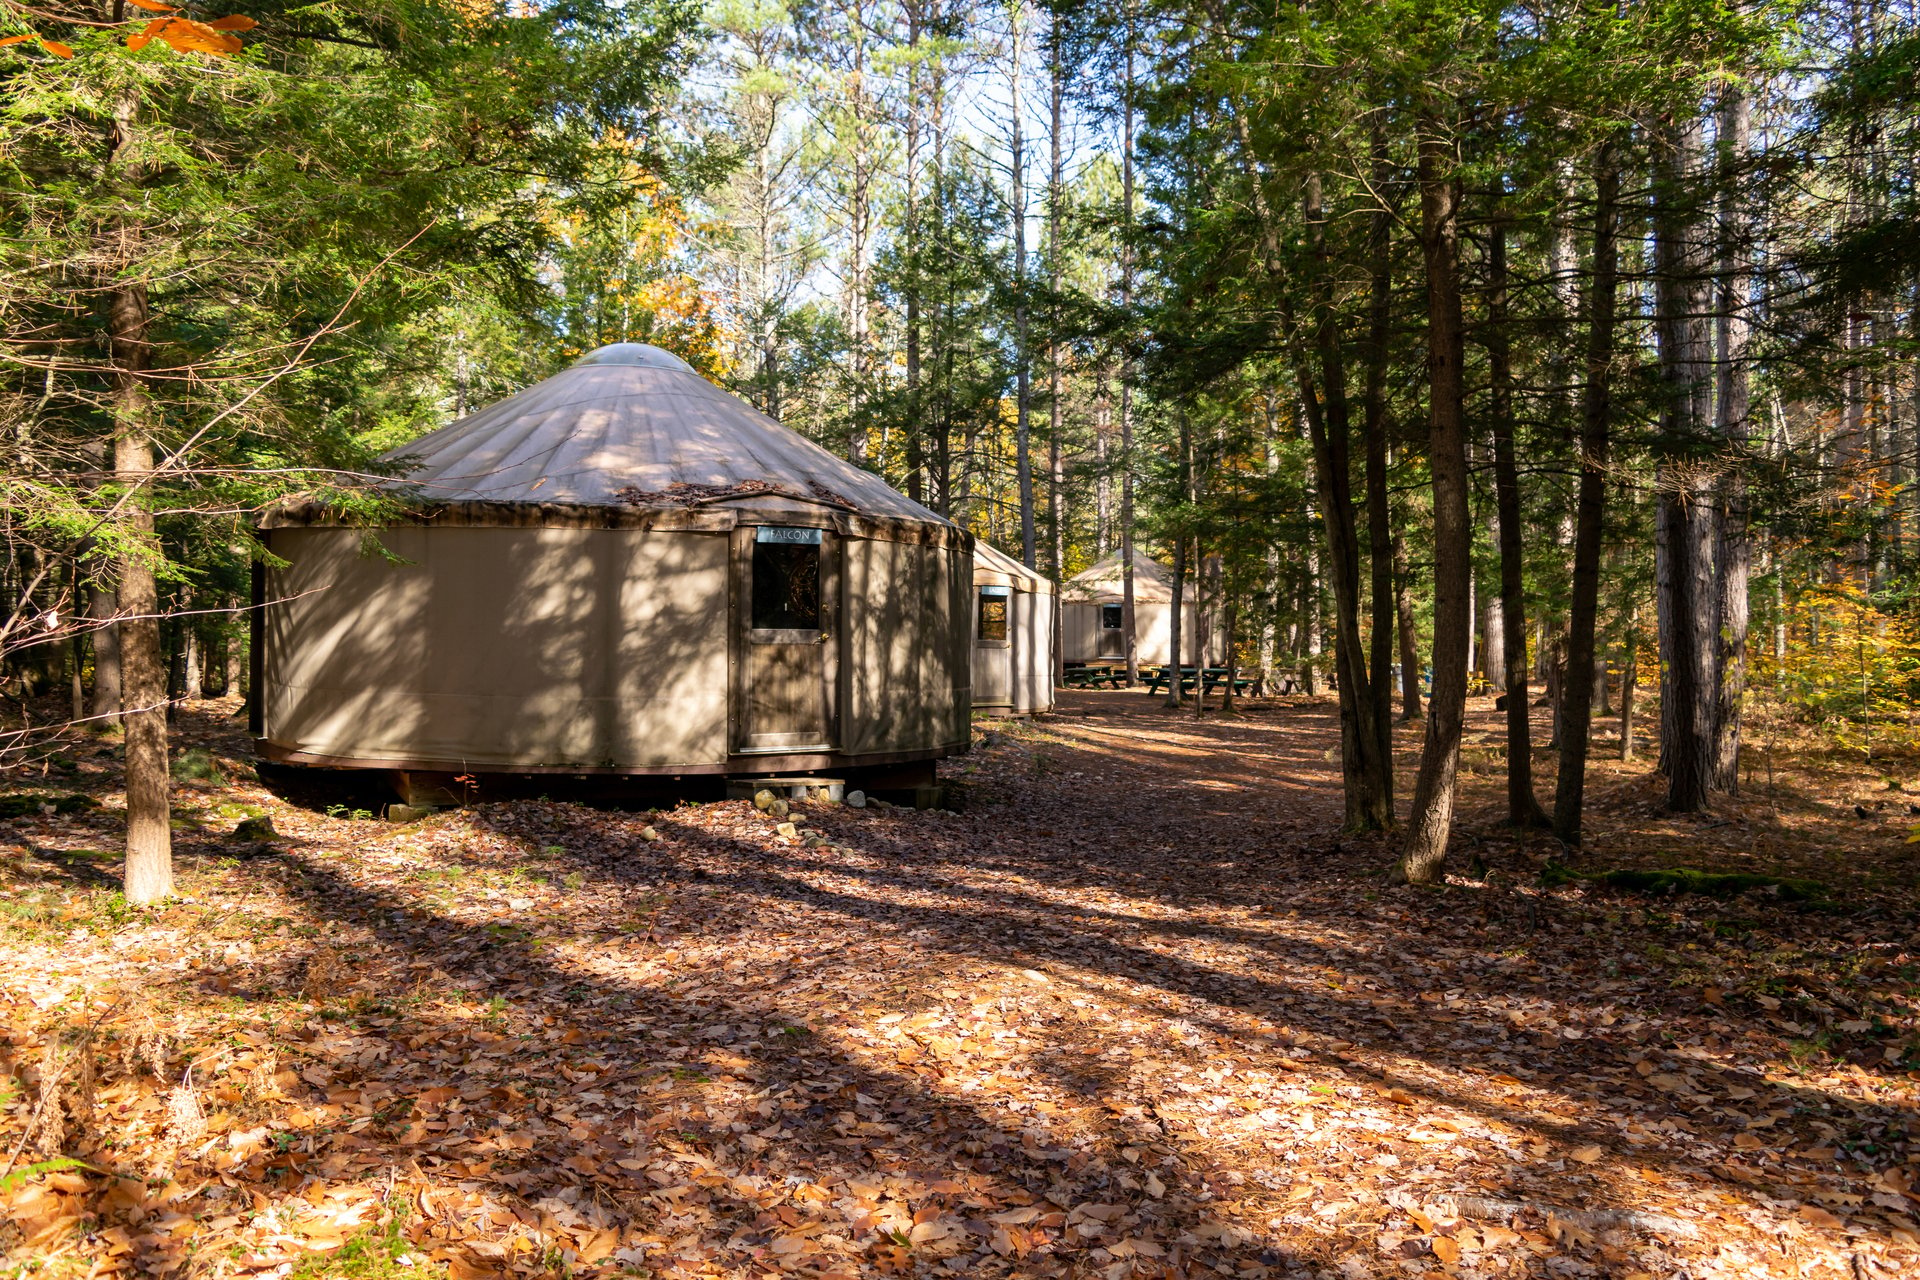 Exterior of Yurts in fall